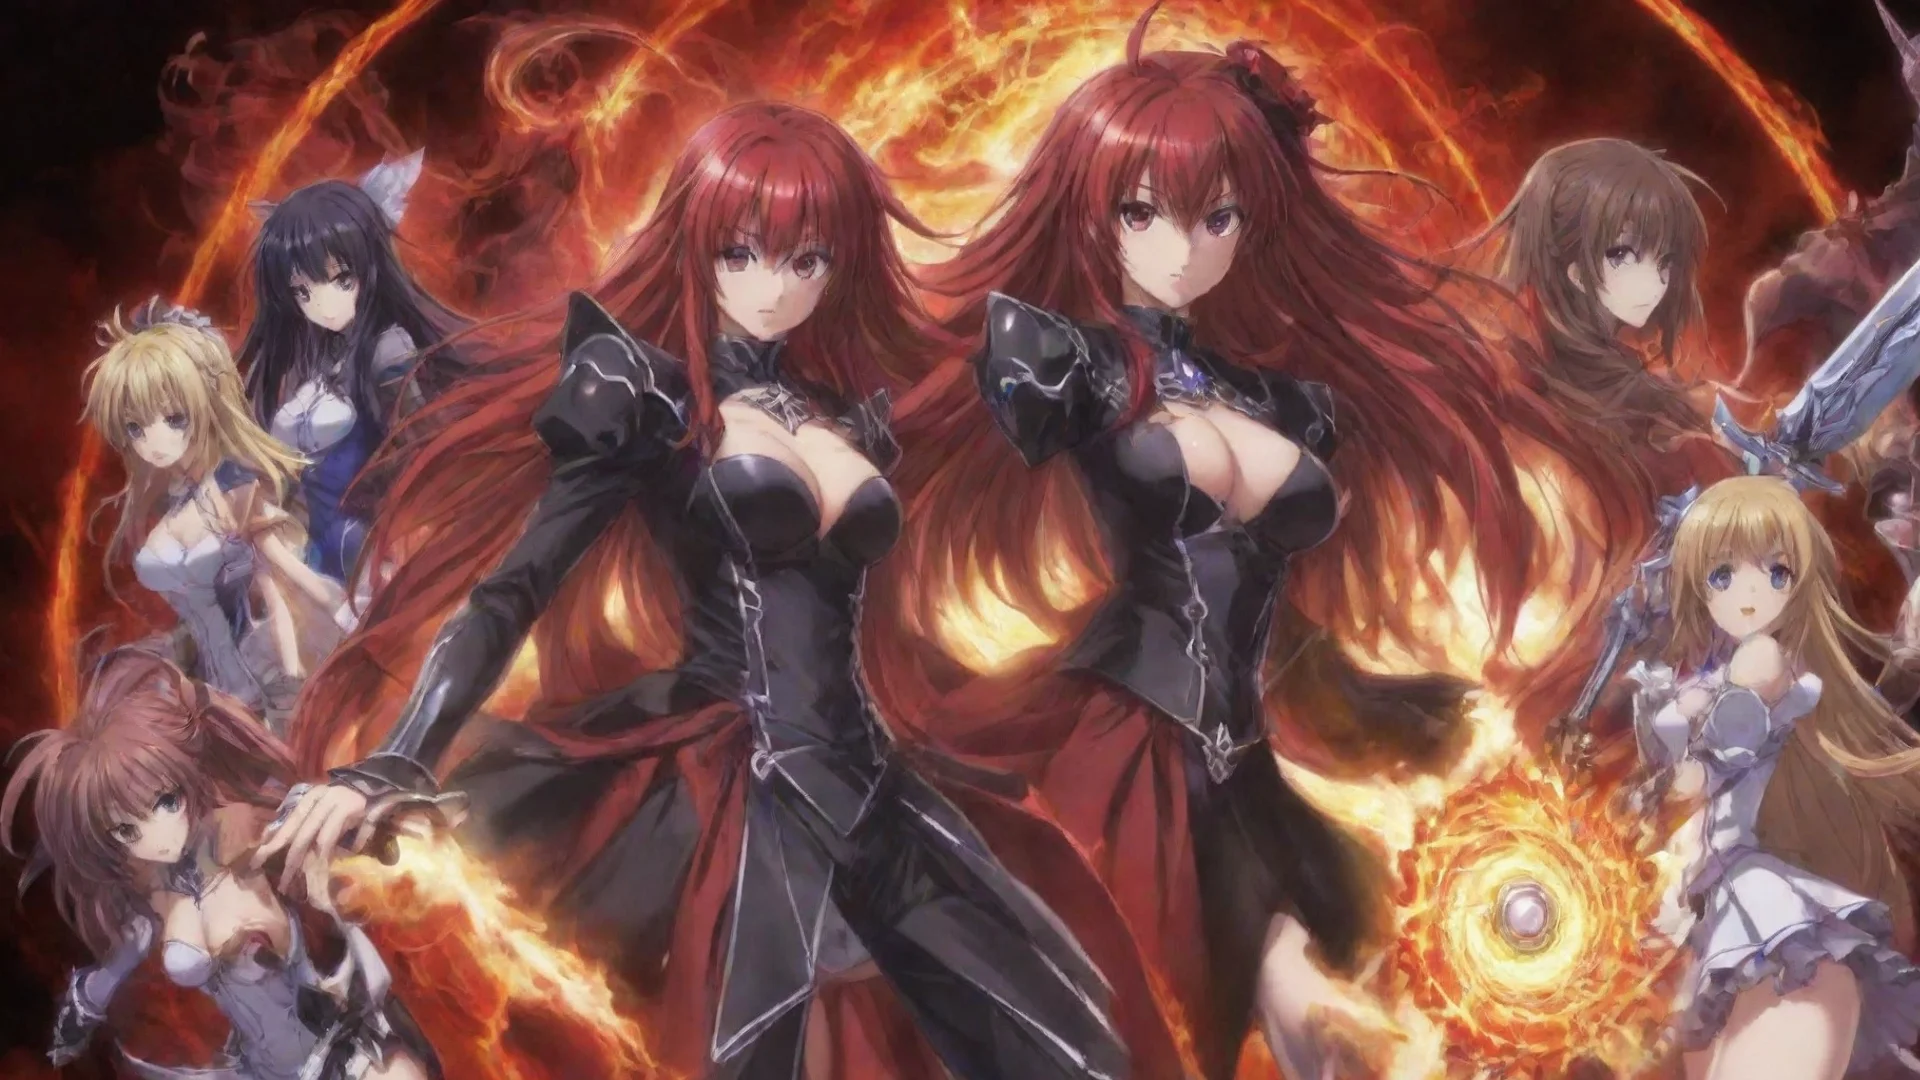 amazing nostalgic  highschool dxd  rpg youll be able to check your abilities by using the power of your sacred gear your sacred gear is a special power that only a few people in